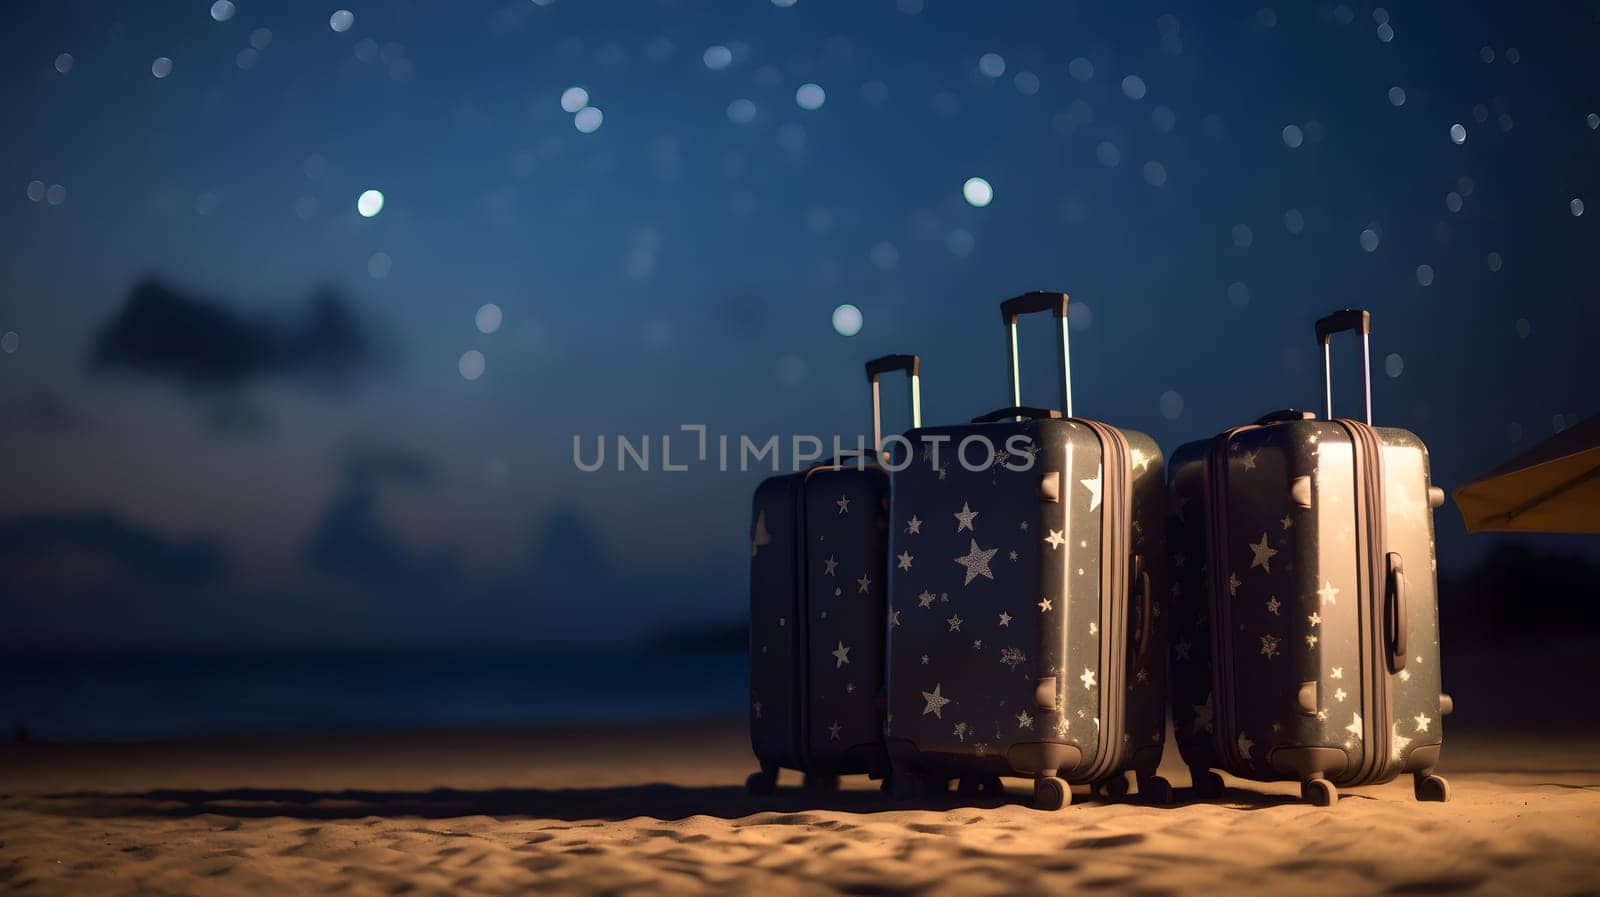 Three modern plastic suitcases on tropical resort beach at night, neural network generated art by z1b